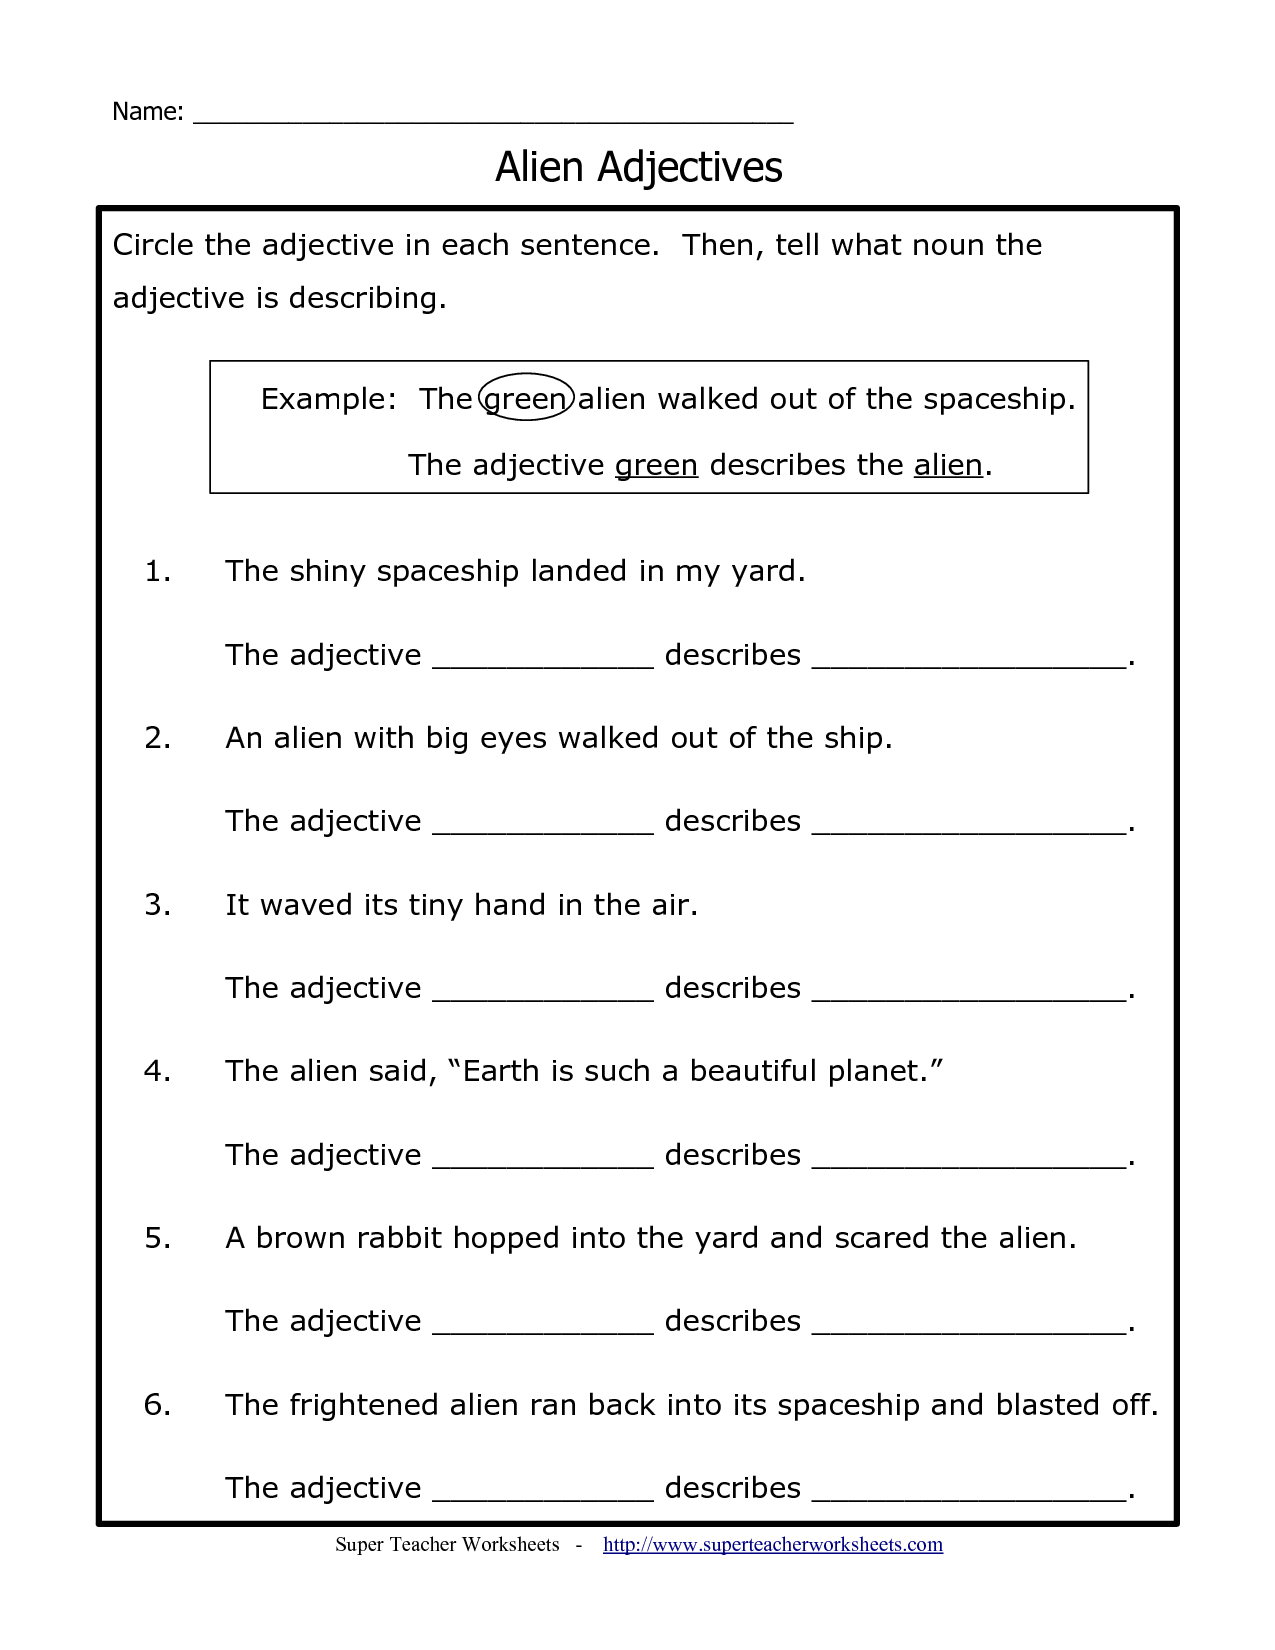 adjectives-and-adverbs-online-worksheet-for-elemental